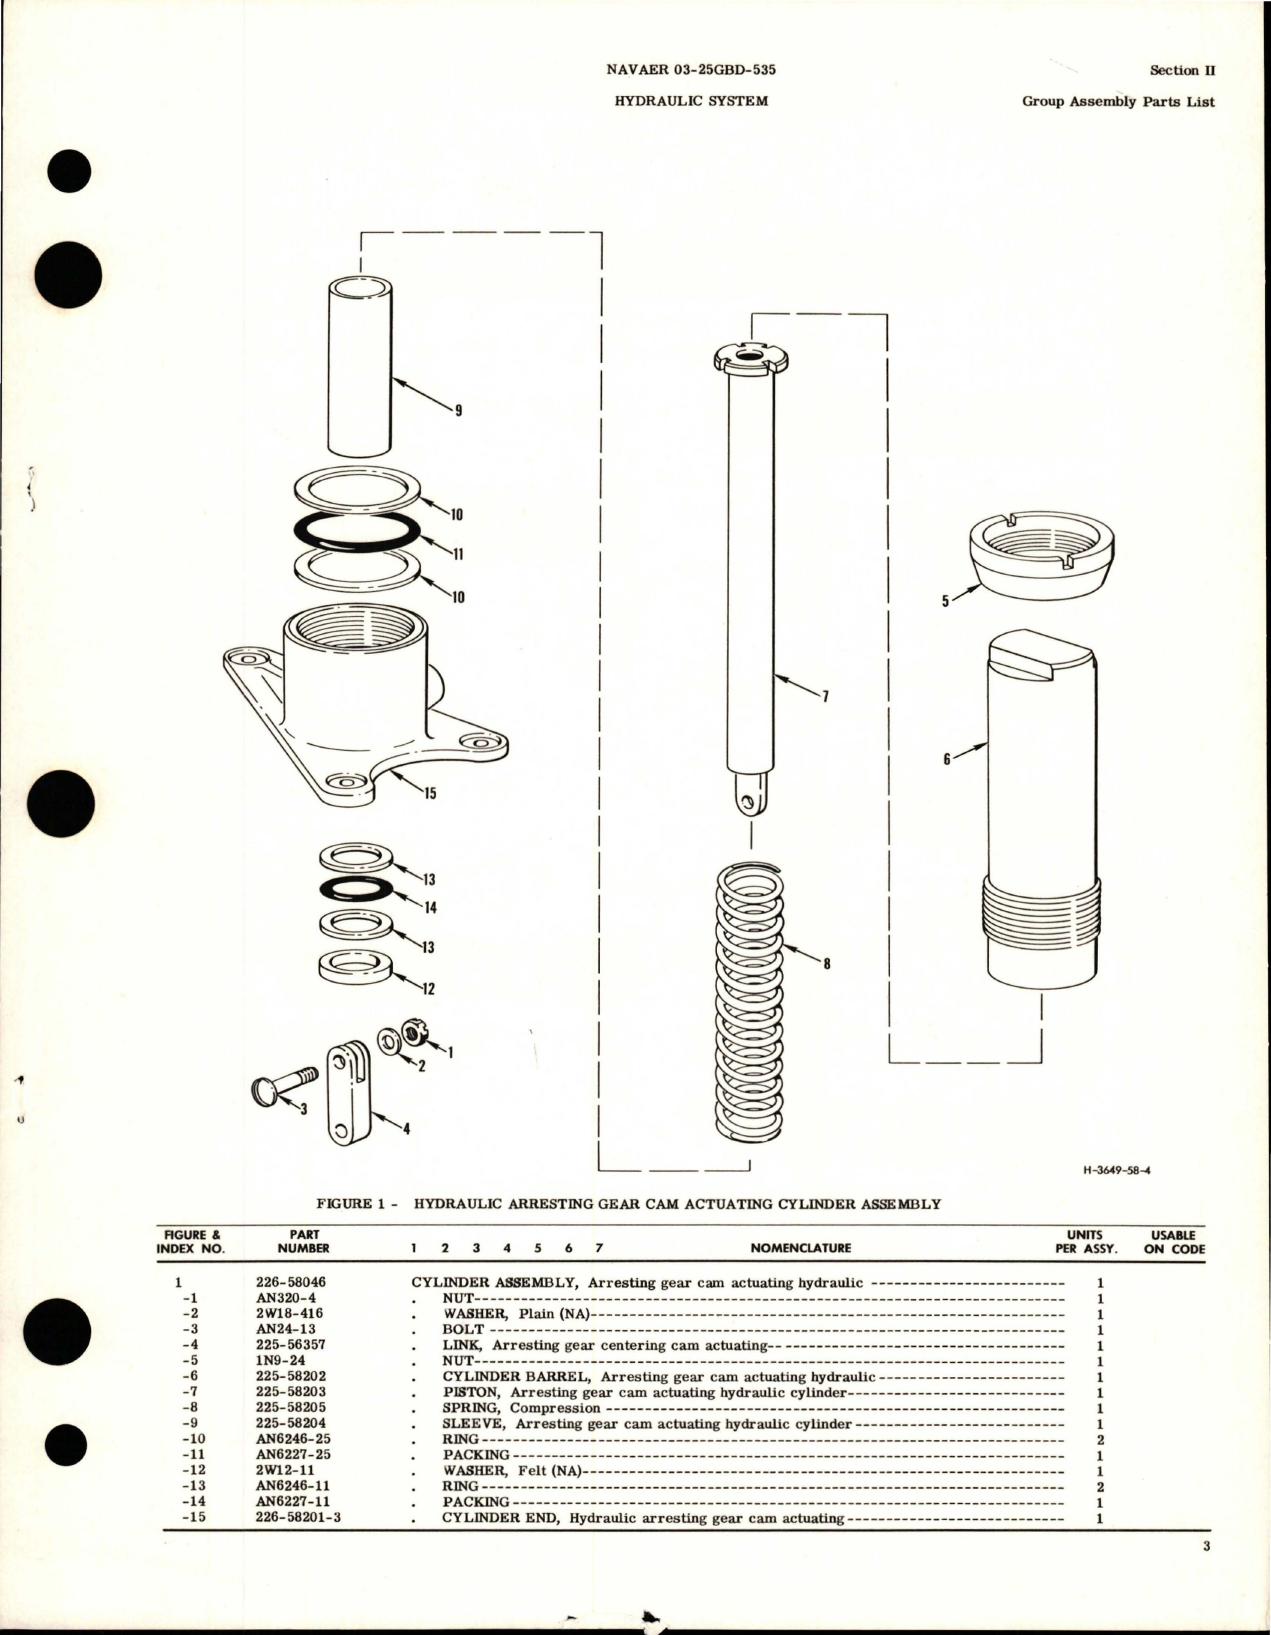 Sample page 5 from AirCorps Library document: Illustrated Parts Breakdown for Hydraulic Arresting Gear Cam Actuating Cylinder Assy - Part 226-58046 